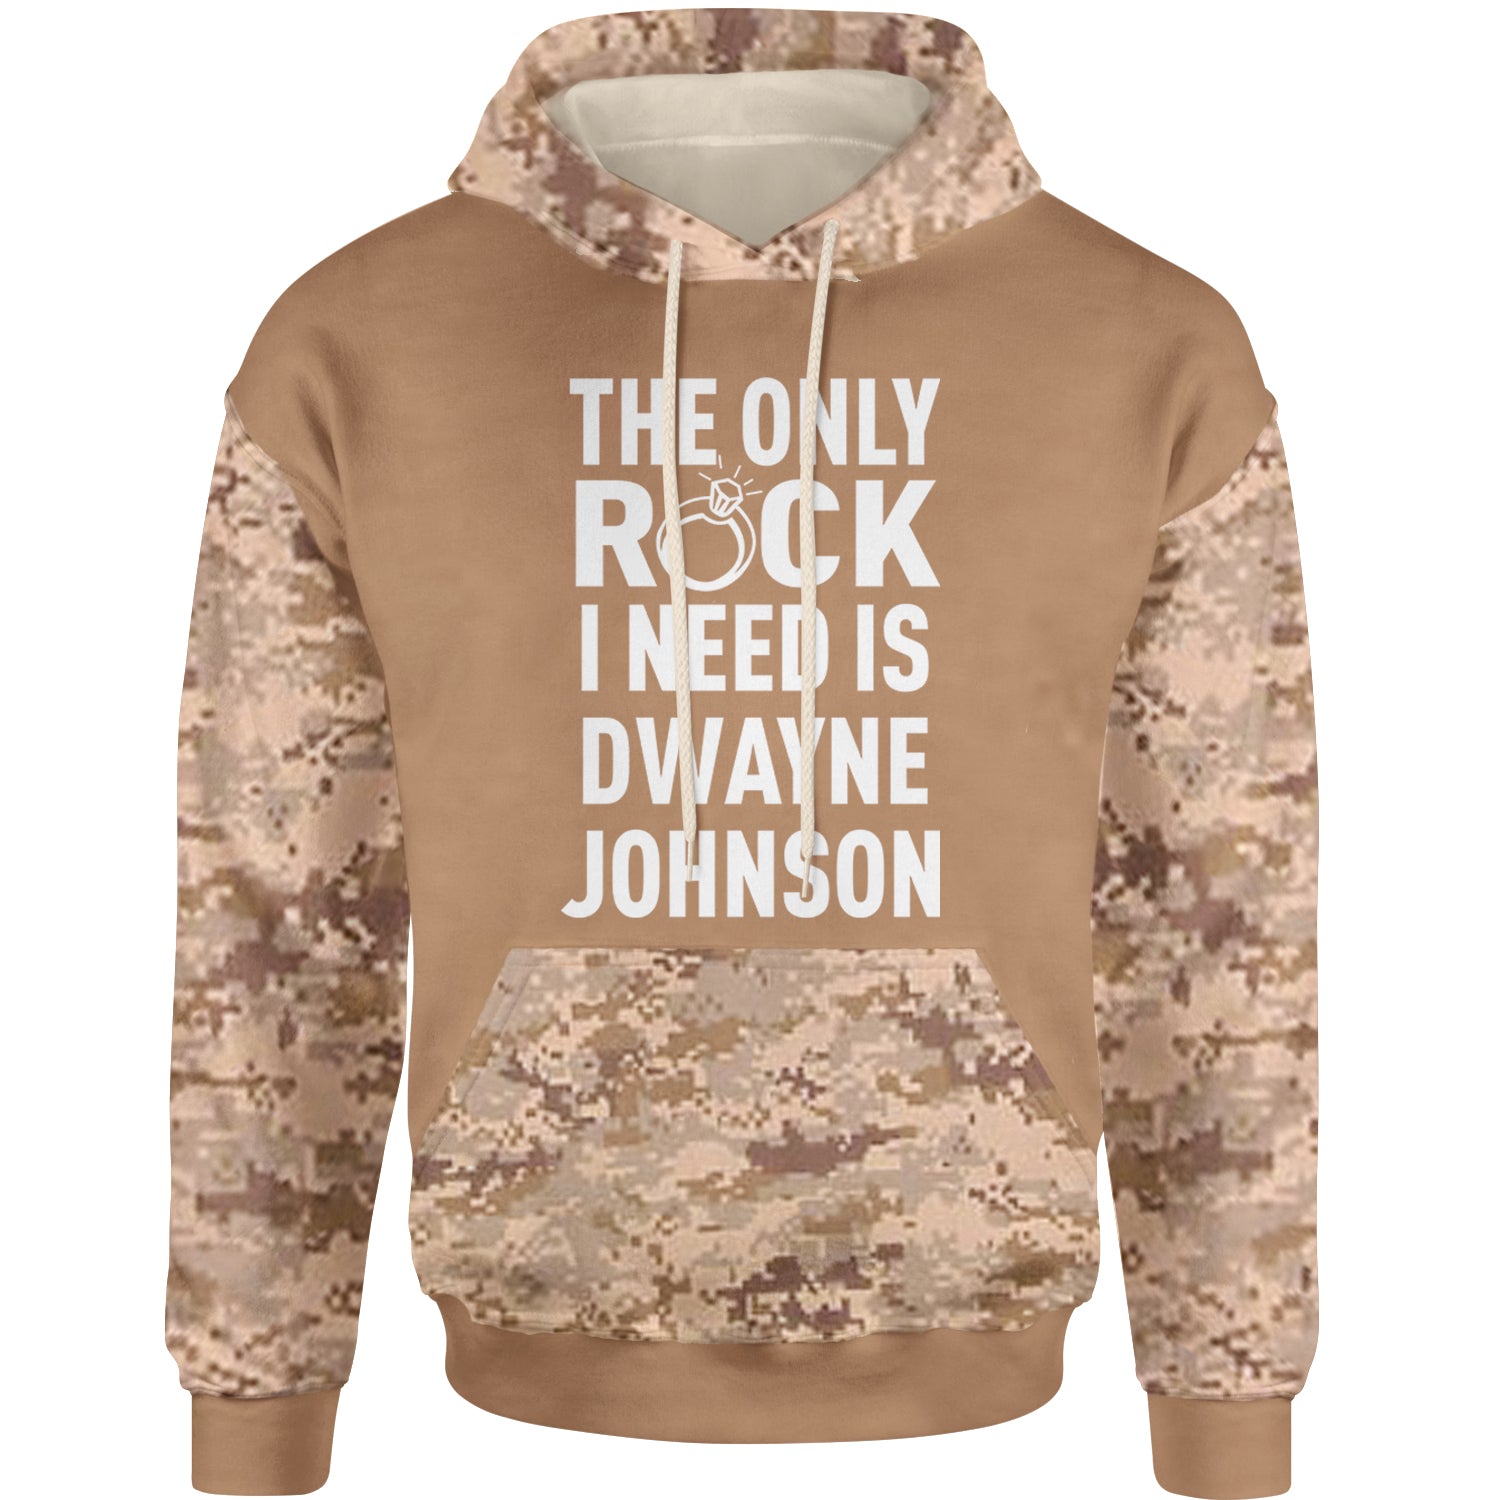 The Only Rock I Need Is Dwayne Johnson Adult Hoodie Sweatshirt dwayne, johnson, marry, me, ring, rock, the, wedding by Expression Tees